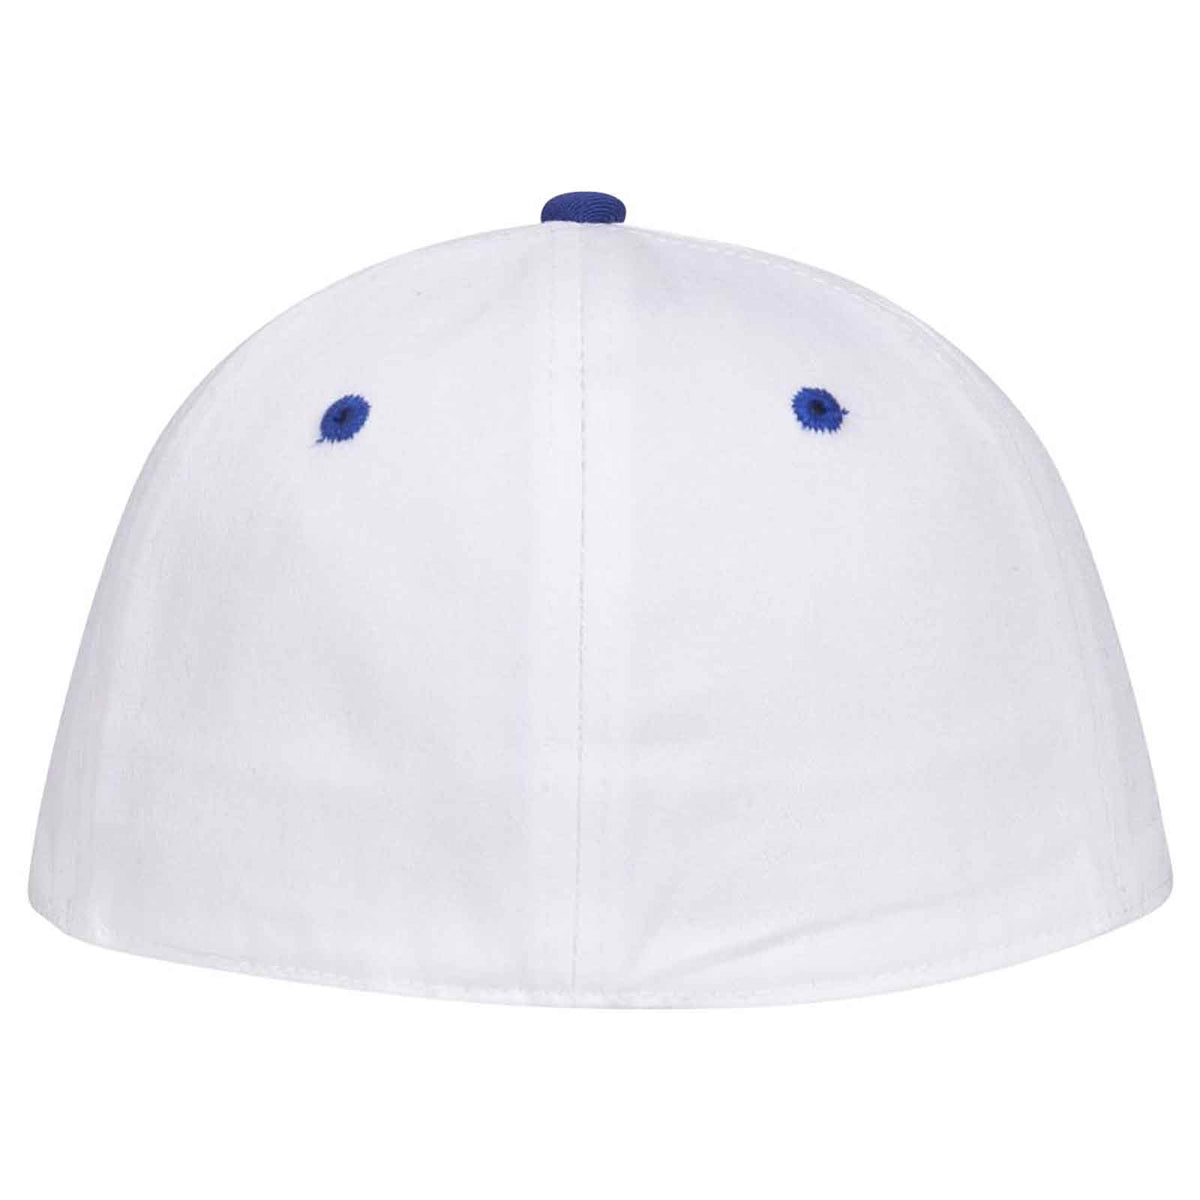 OTTO 12-267 Stretchable Deluxe Brushed Cotton Twill Sandwich Visor Low Profile Pro Style Cap S/M - Royal White White - HIT a Double - 2